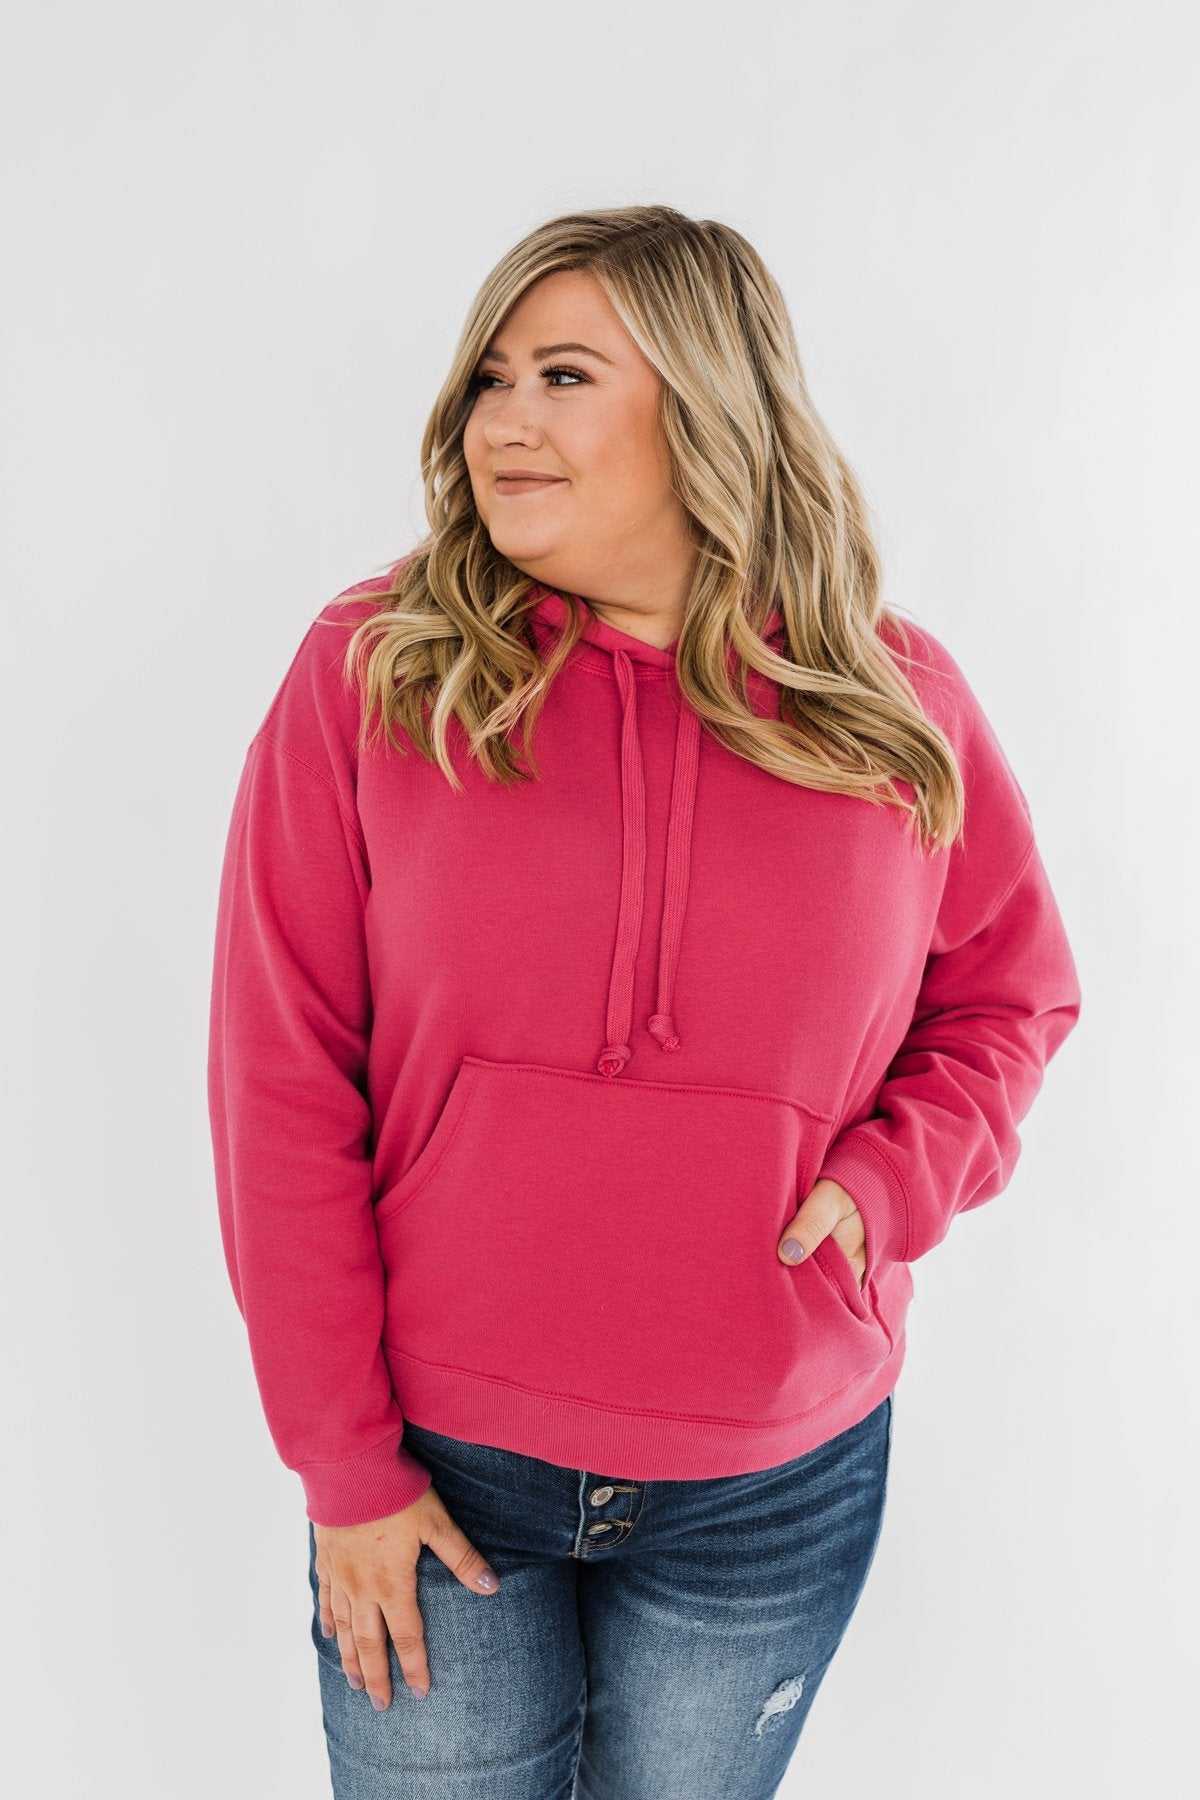 Keep It Cozy Cropped Hoodie- Hot Pink – The Pulse Boutique